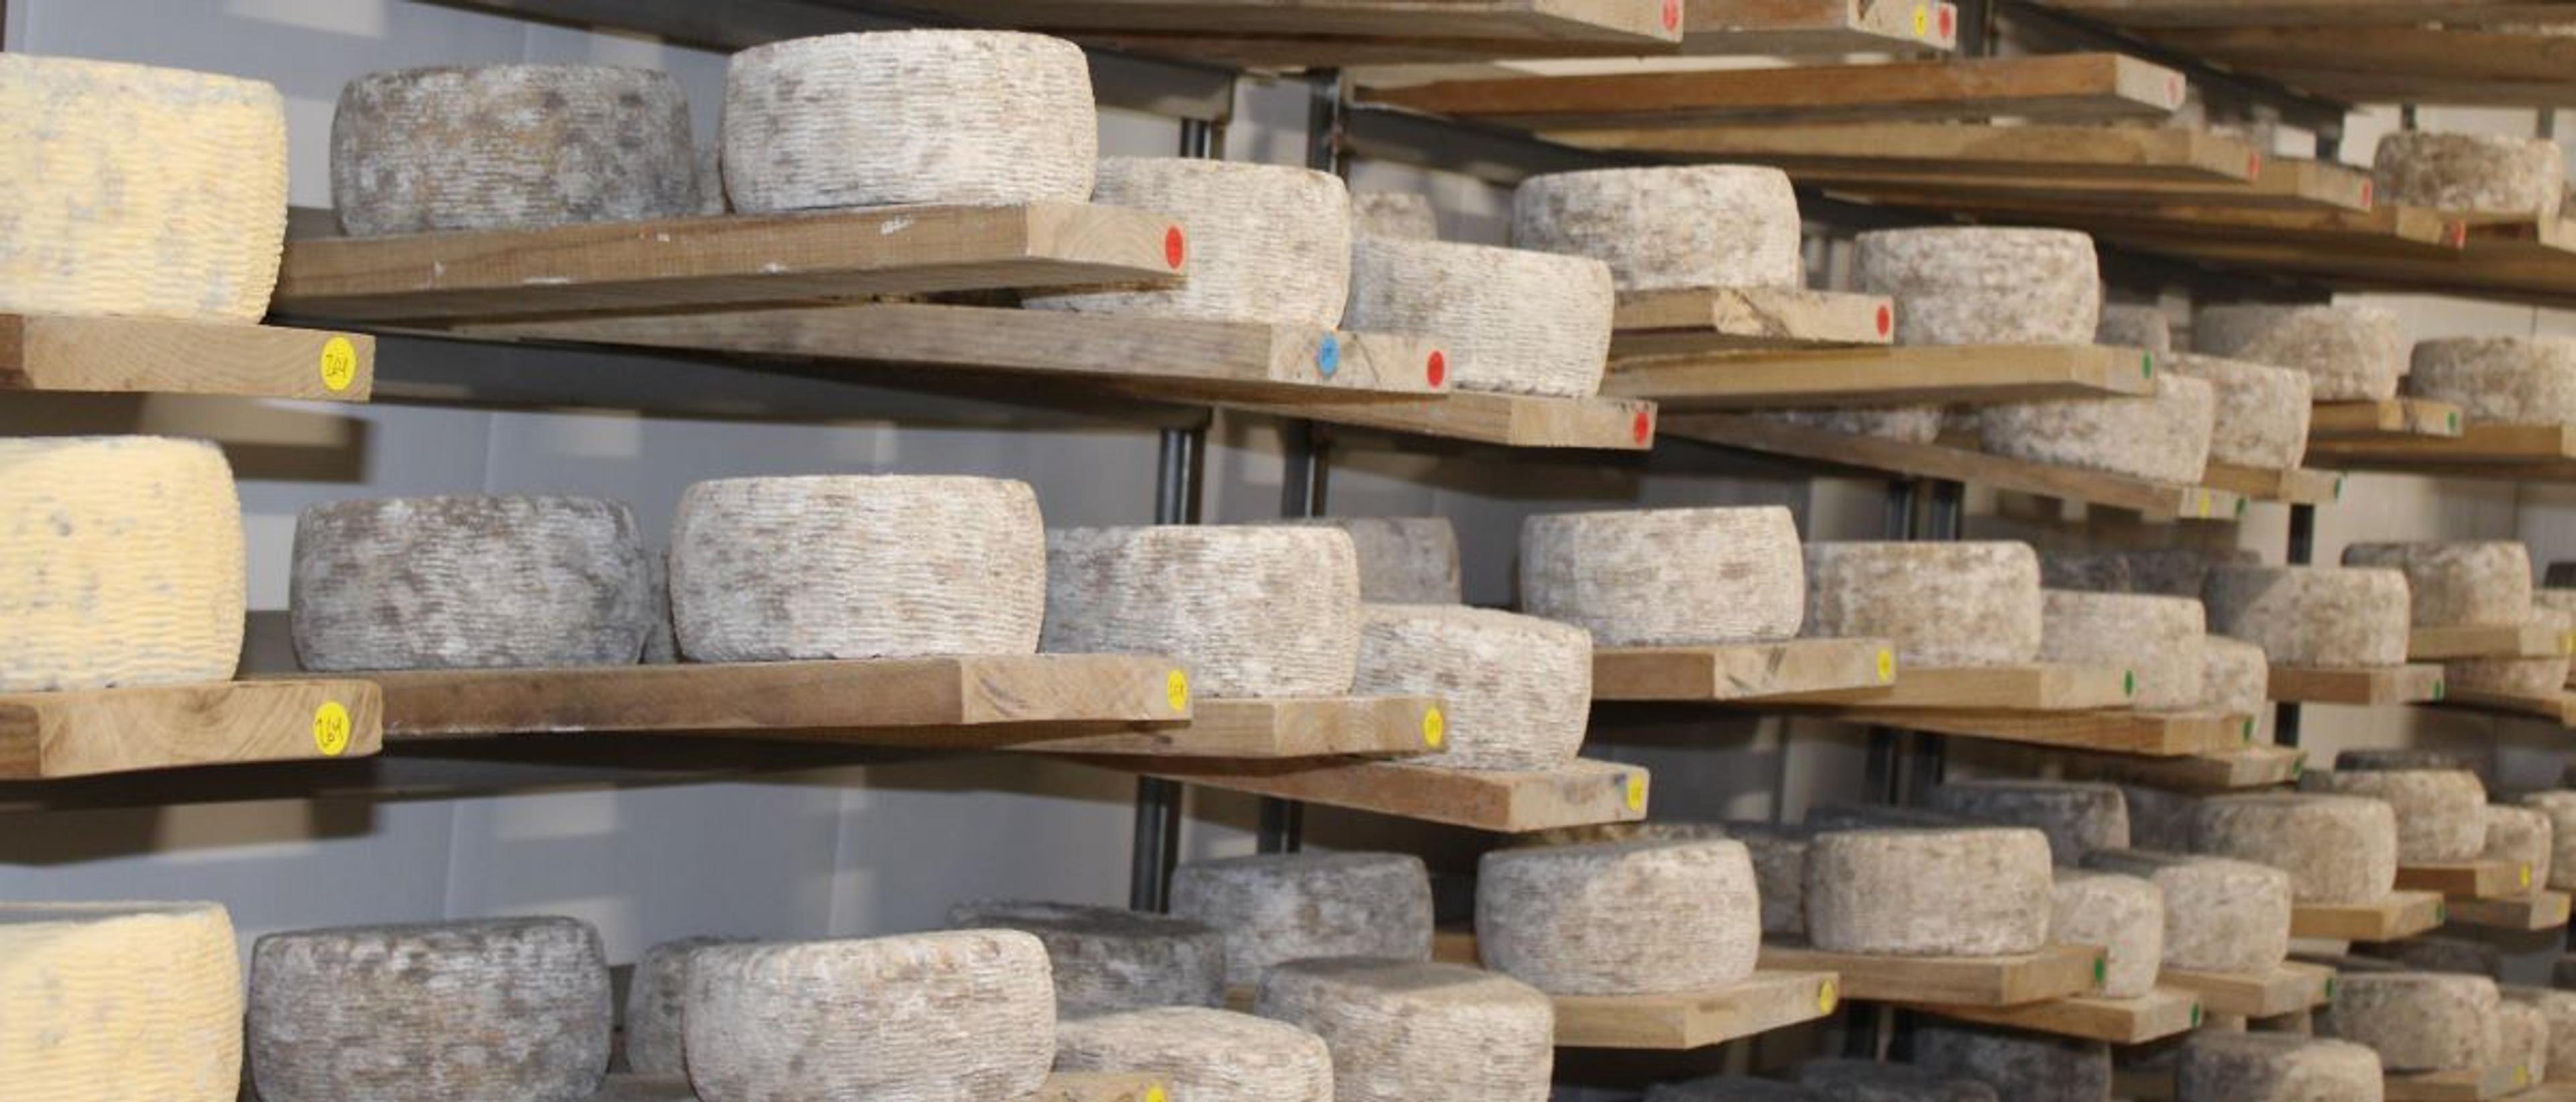 Cheese wheels cure in the cheese room at the Webb farm.